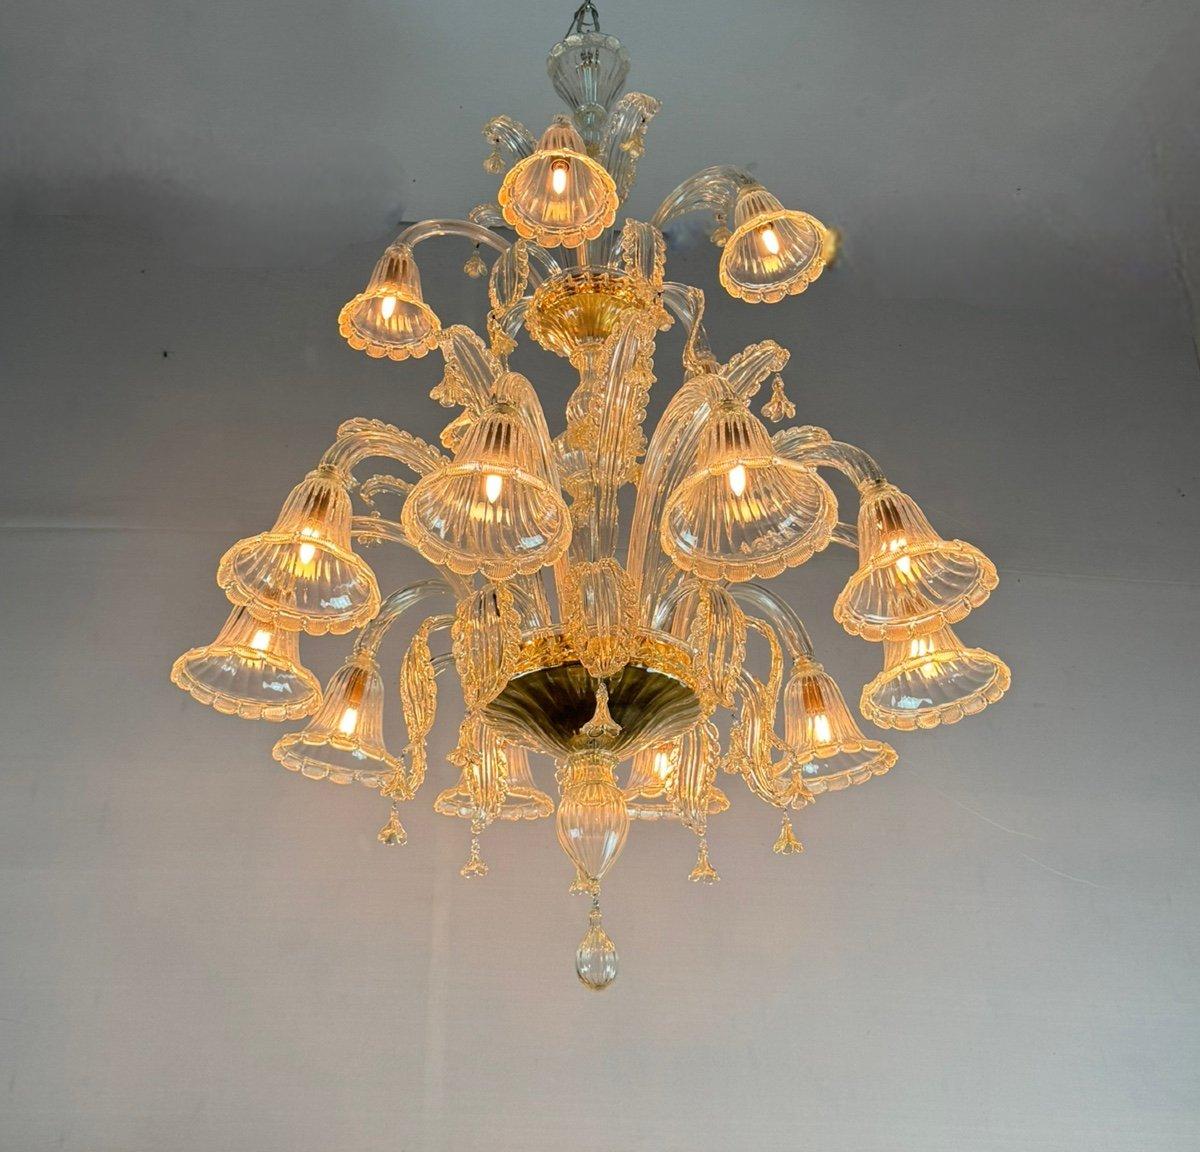 Venetian Chandelier In Golden Murano Glass 15 Lights On Two Levels, Circa 1940 For Sale 3